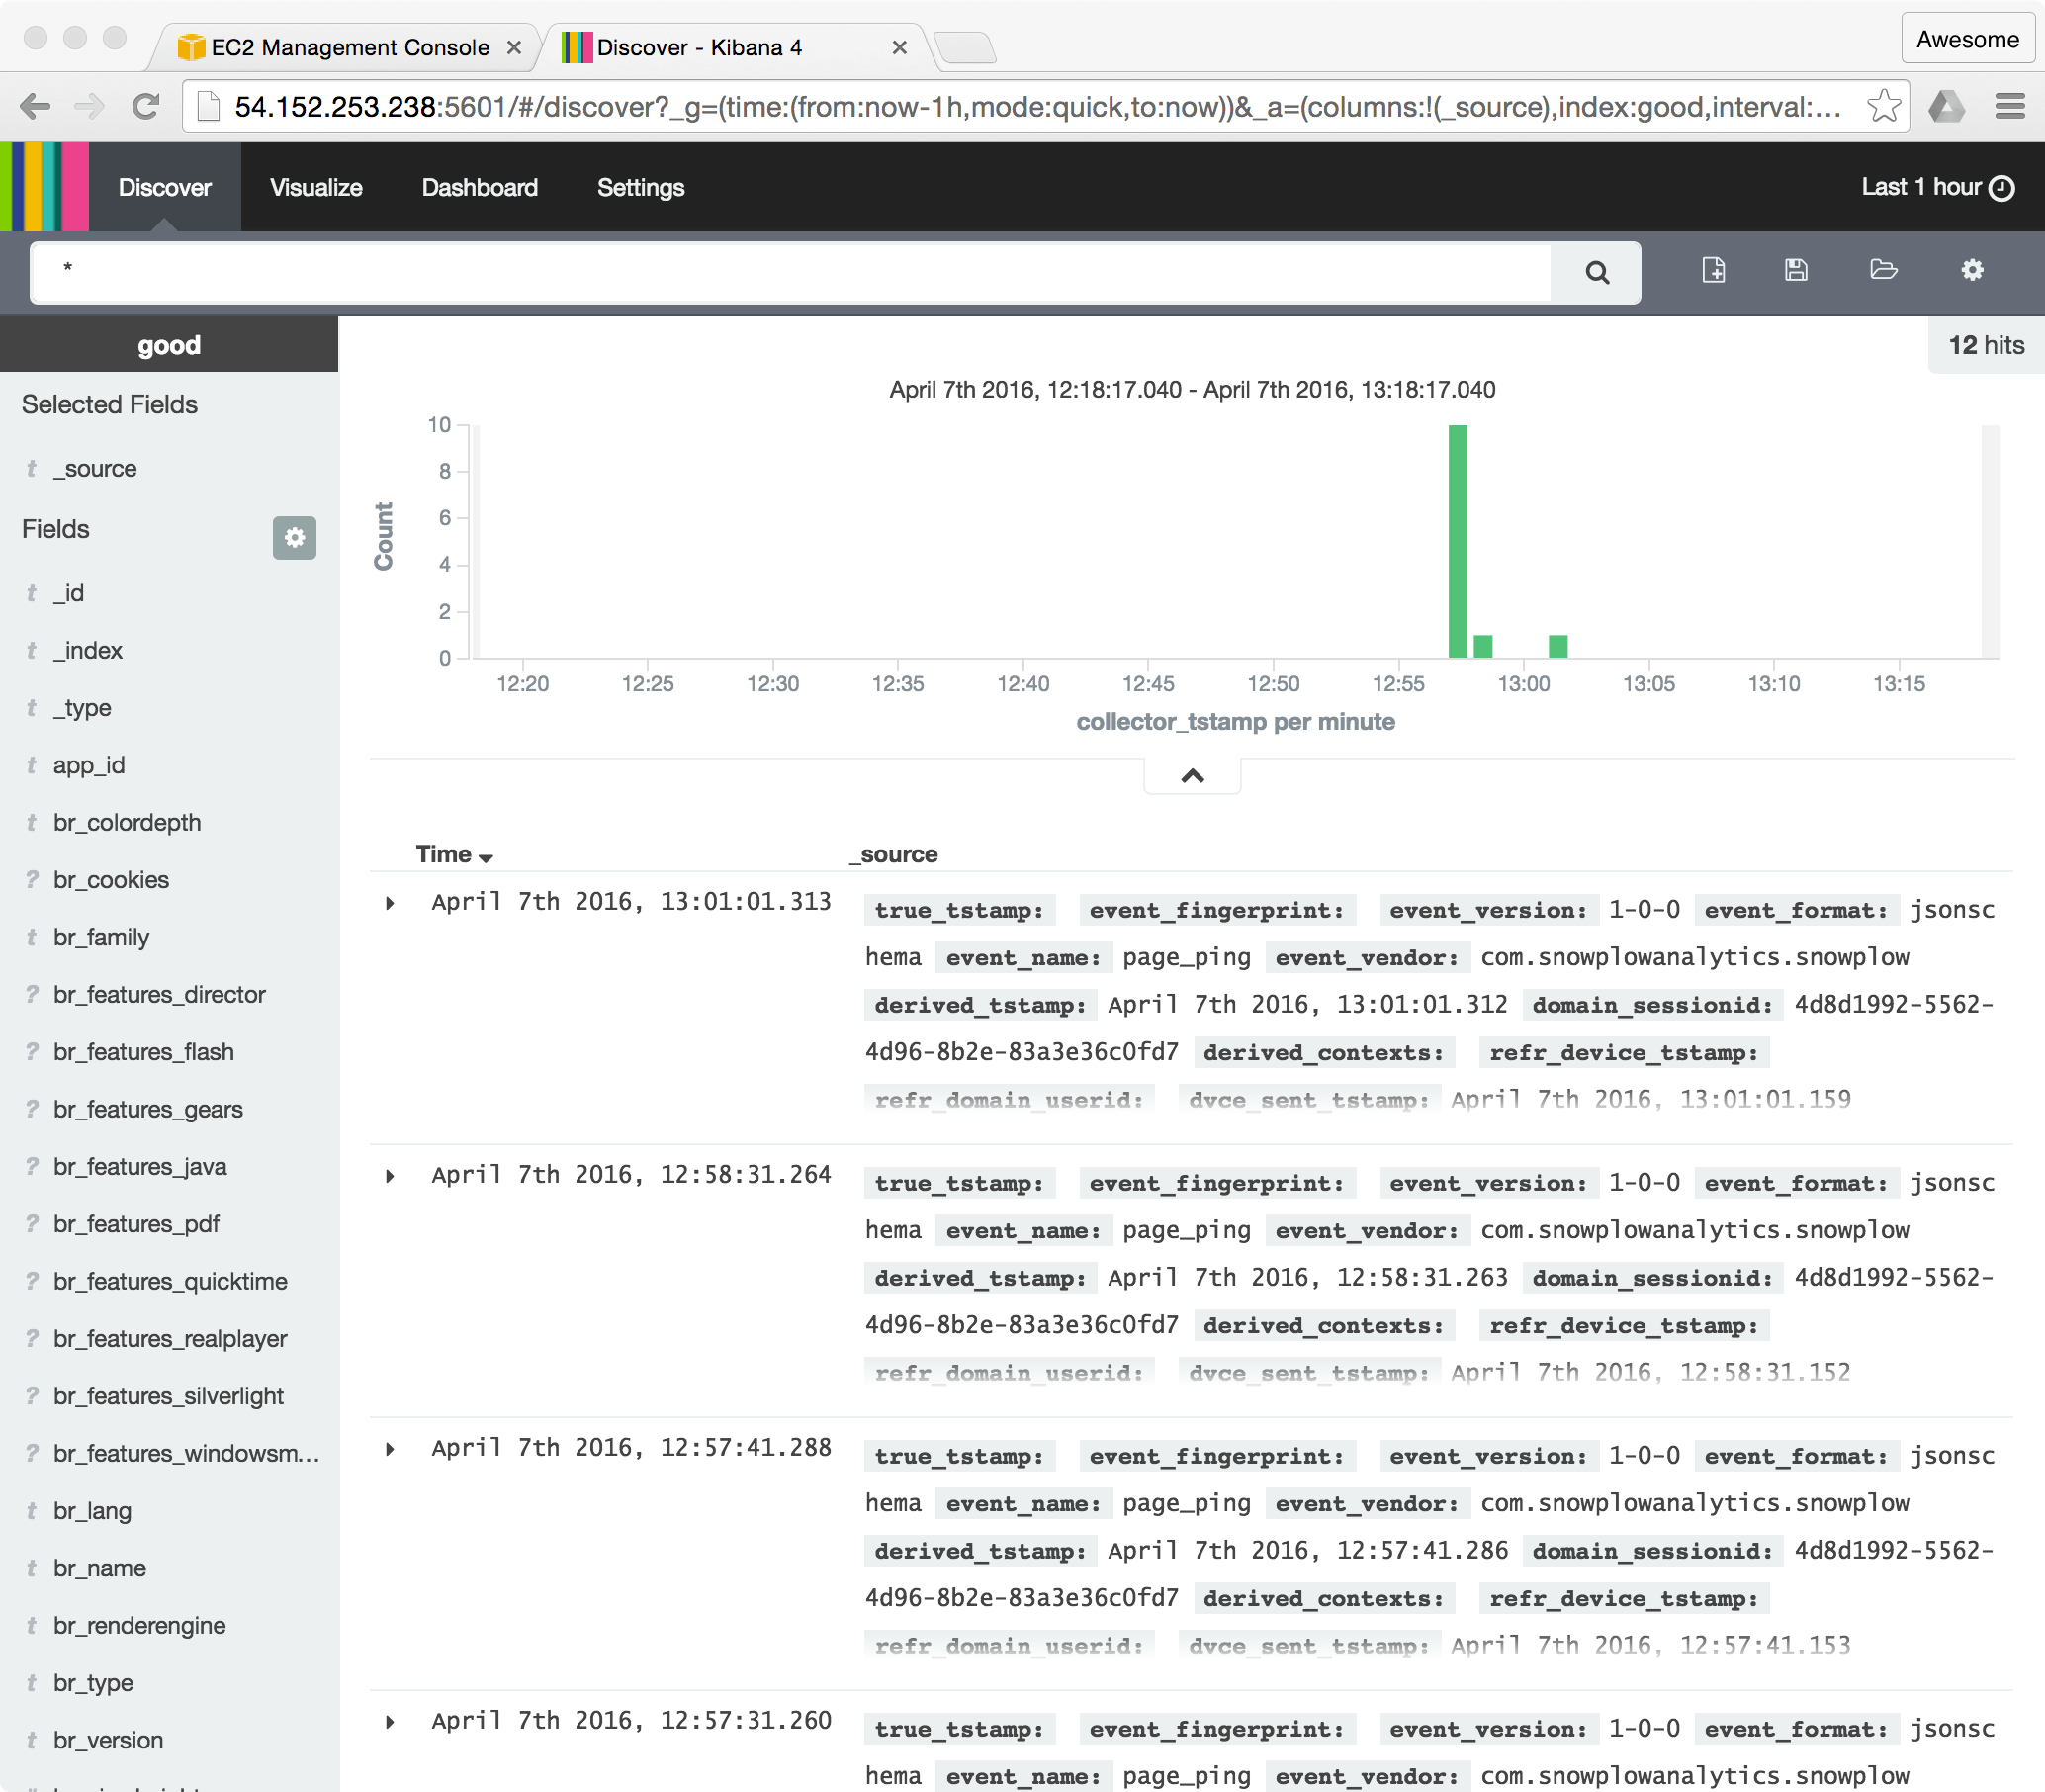 Viewing good event data in Kibana